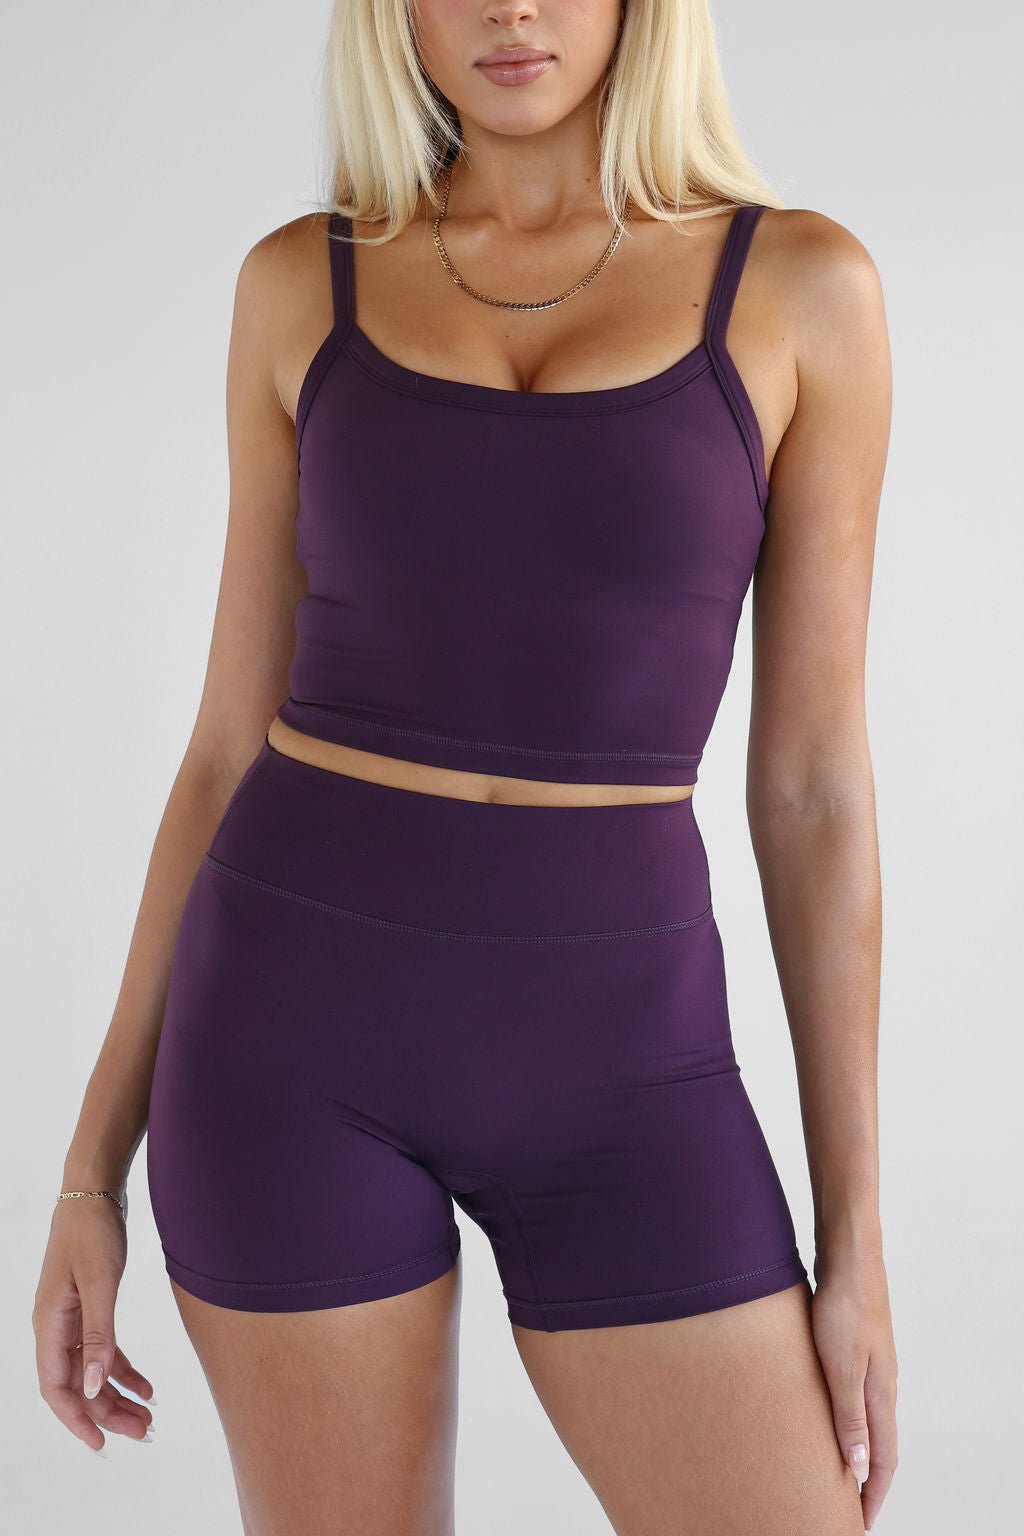 SIGNATURE Tank - Plum SHIPPING FROM 12/02 - LEELO ACTIVE